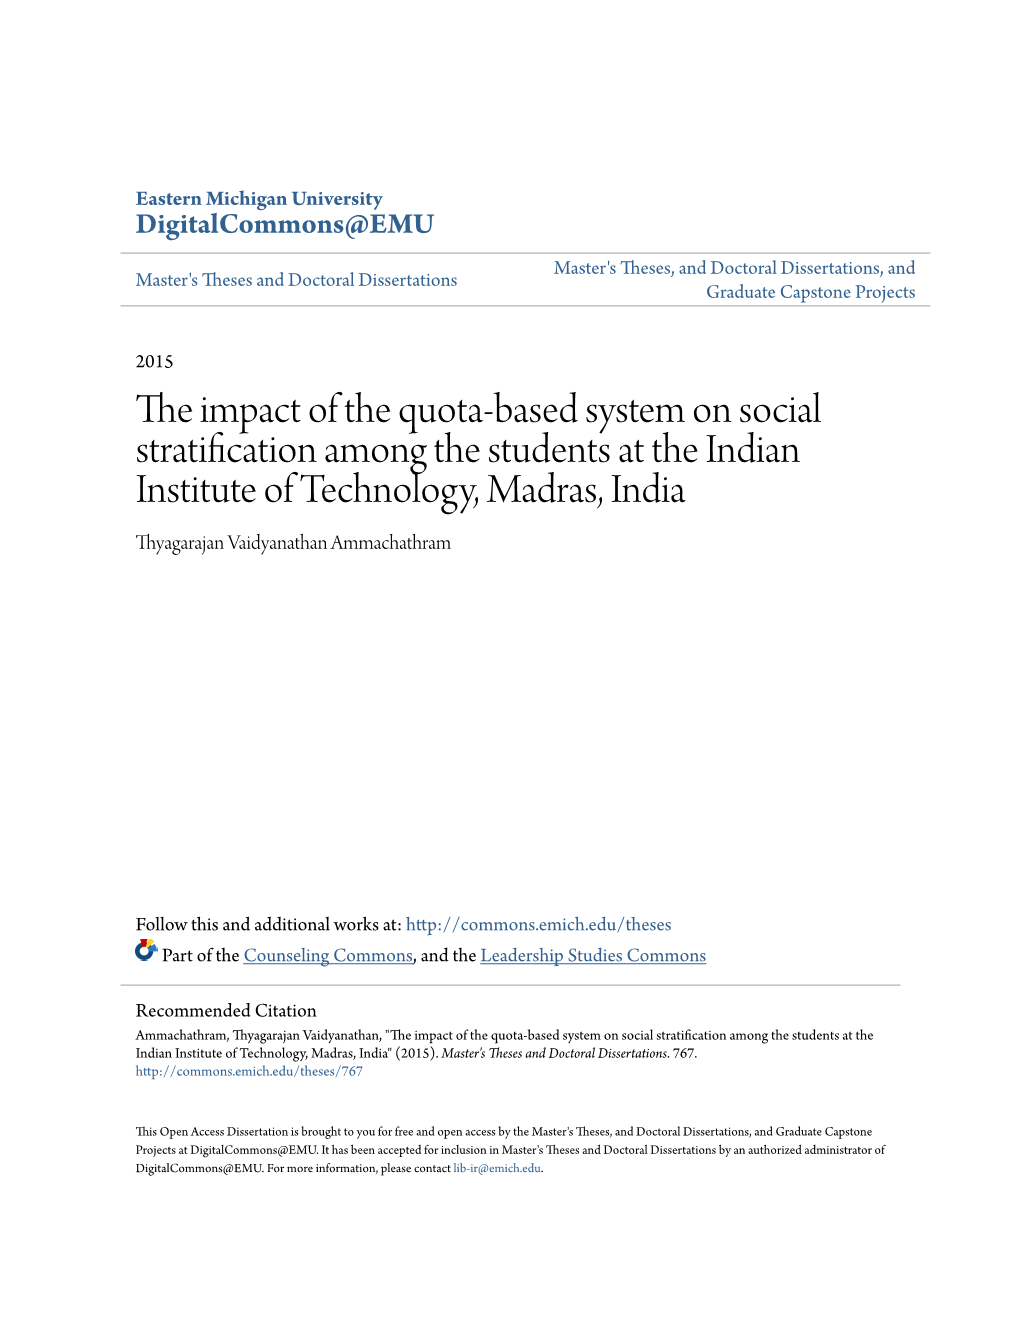 The Impact of the Quota-Based System on Social Stratification Among The